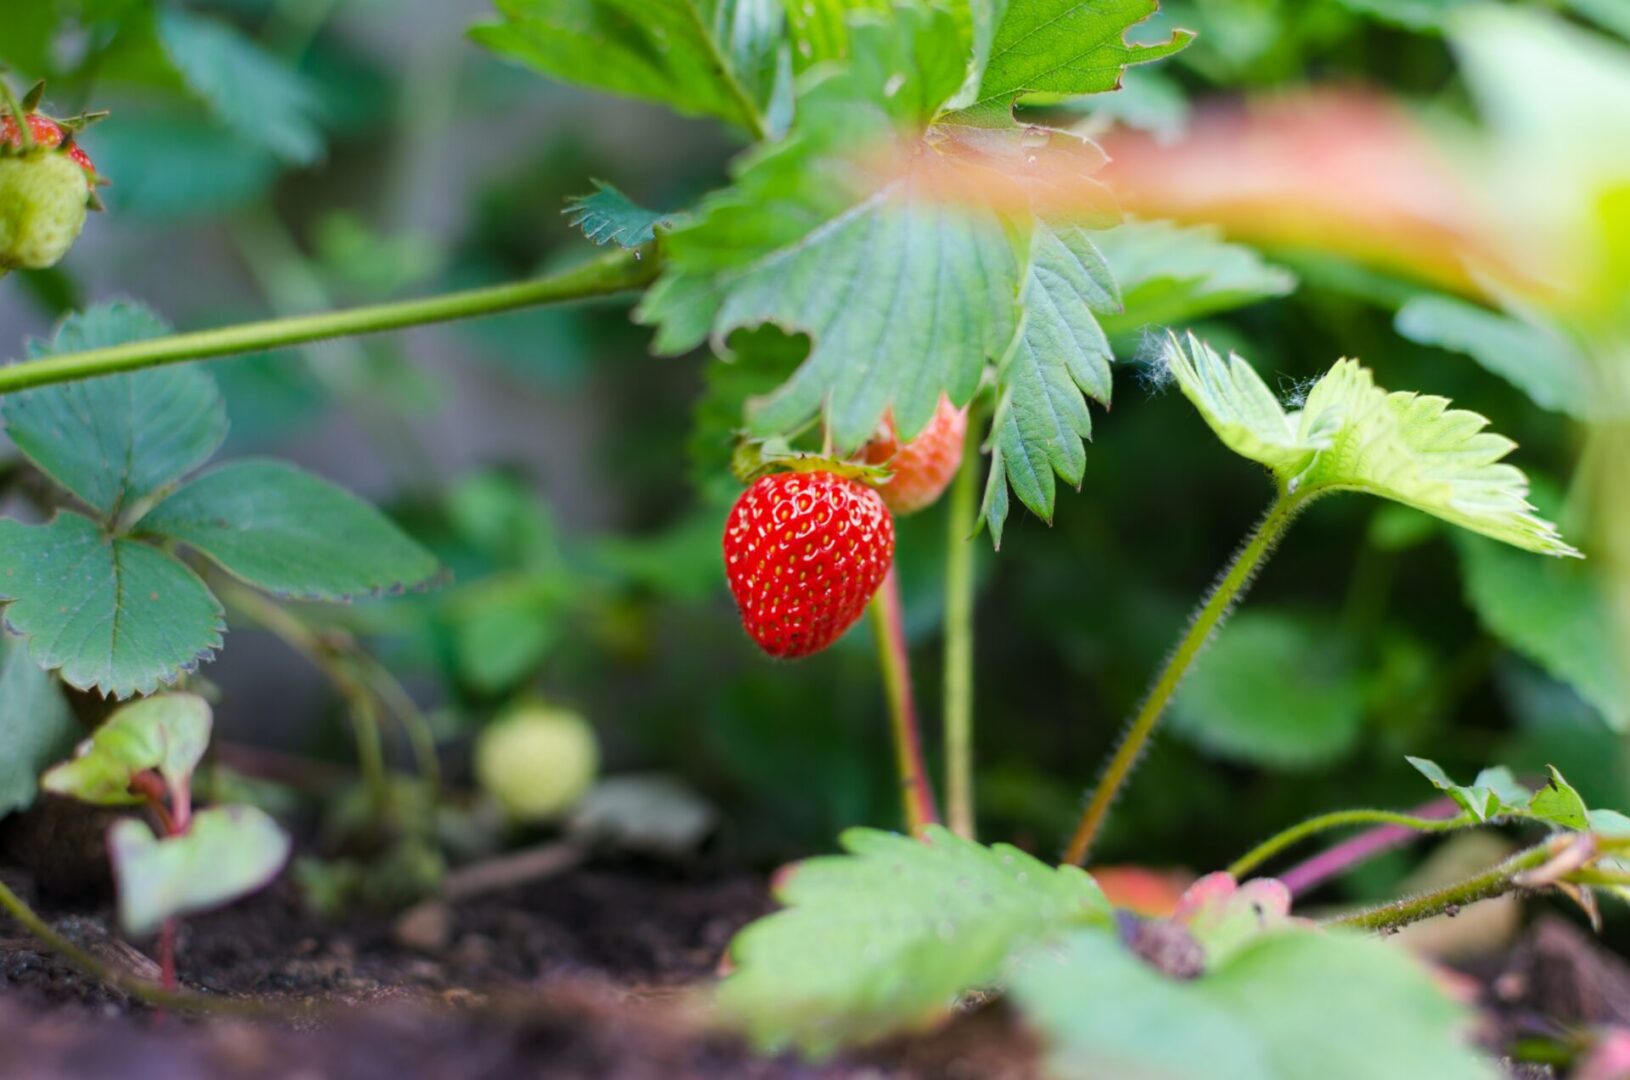 A close up of a strawberry plant with one berry still on it.